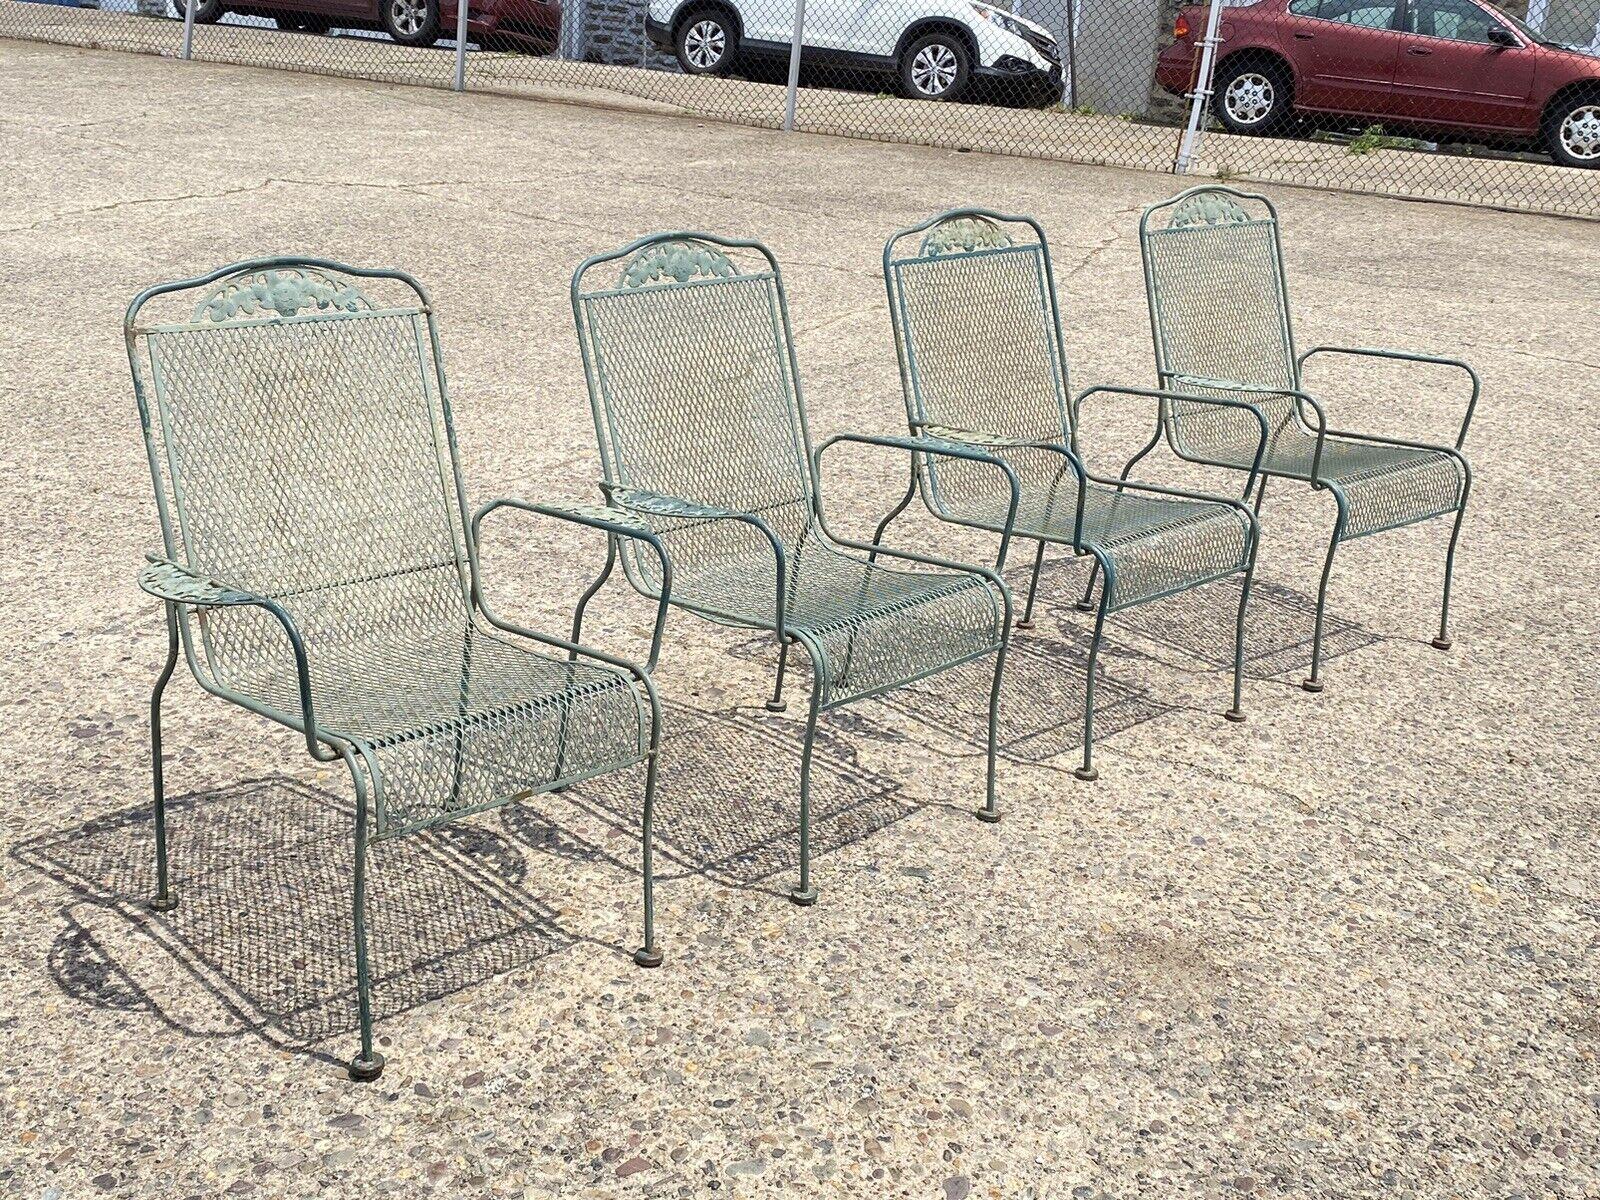 Vintage Meadowcraft Dogwood Green Wrought Iron Outdoor Patio Arm Chairs - Set of 4. circa mid to late 20th century. Measurements: 38